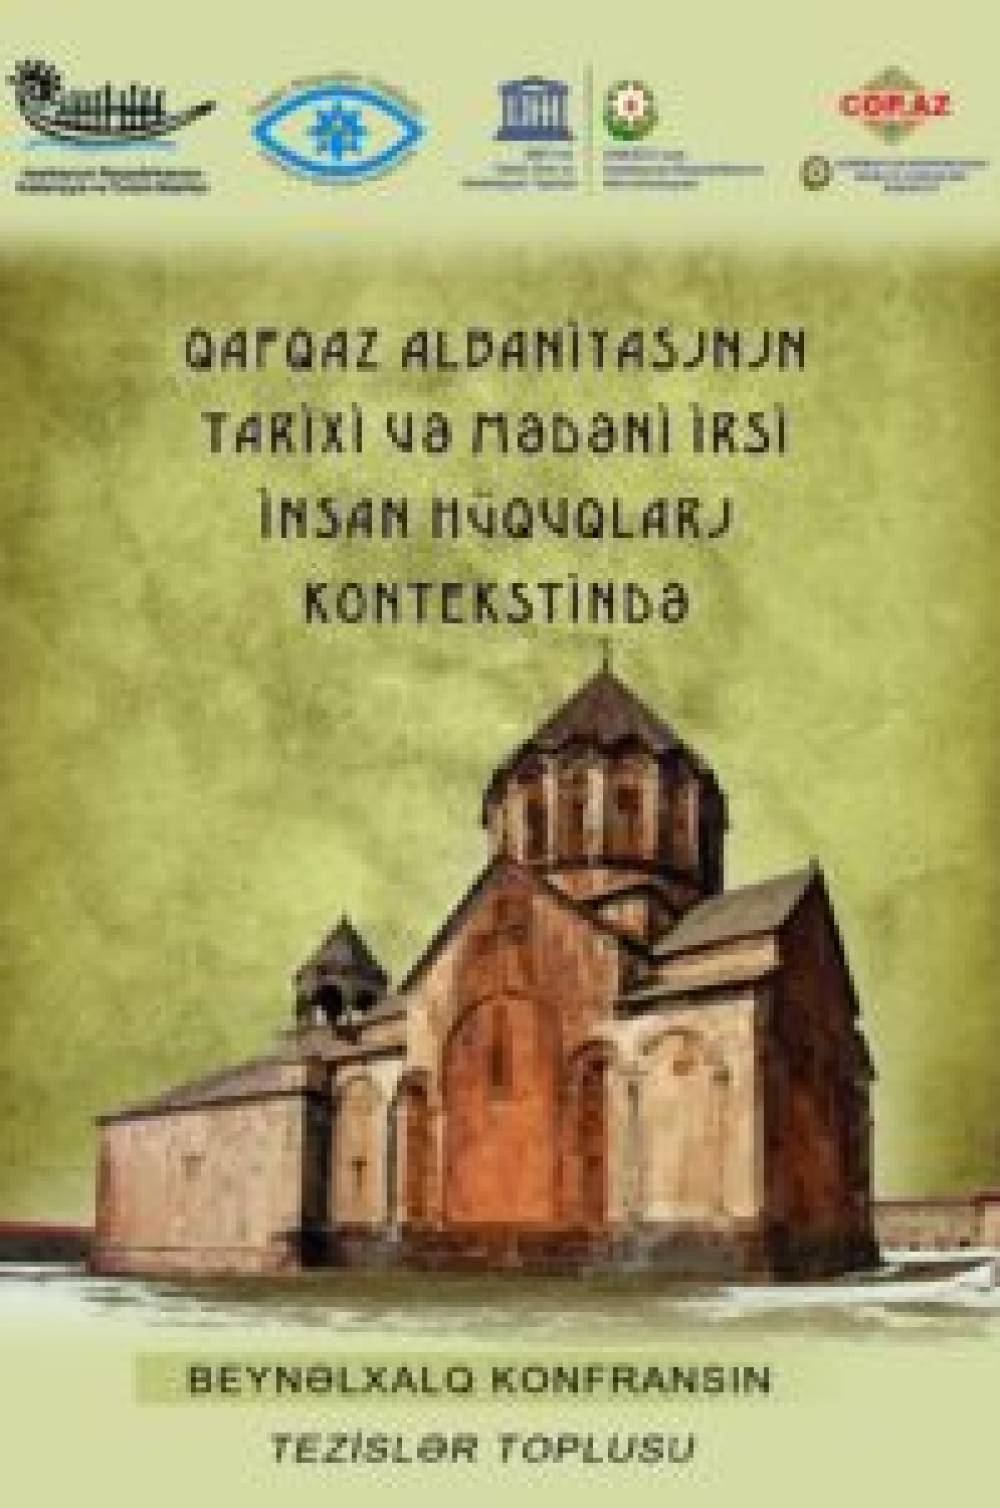 Historical and cultural heritage of the Caucasian Albania in the context of human rights Collection of abstracts